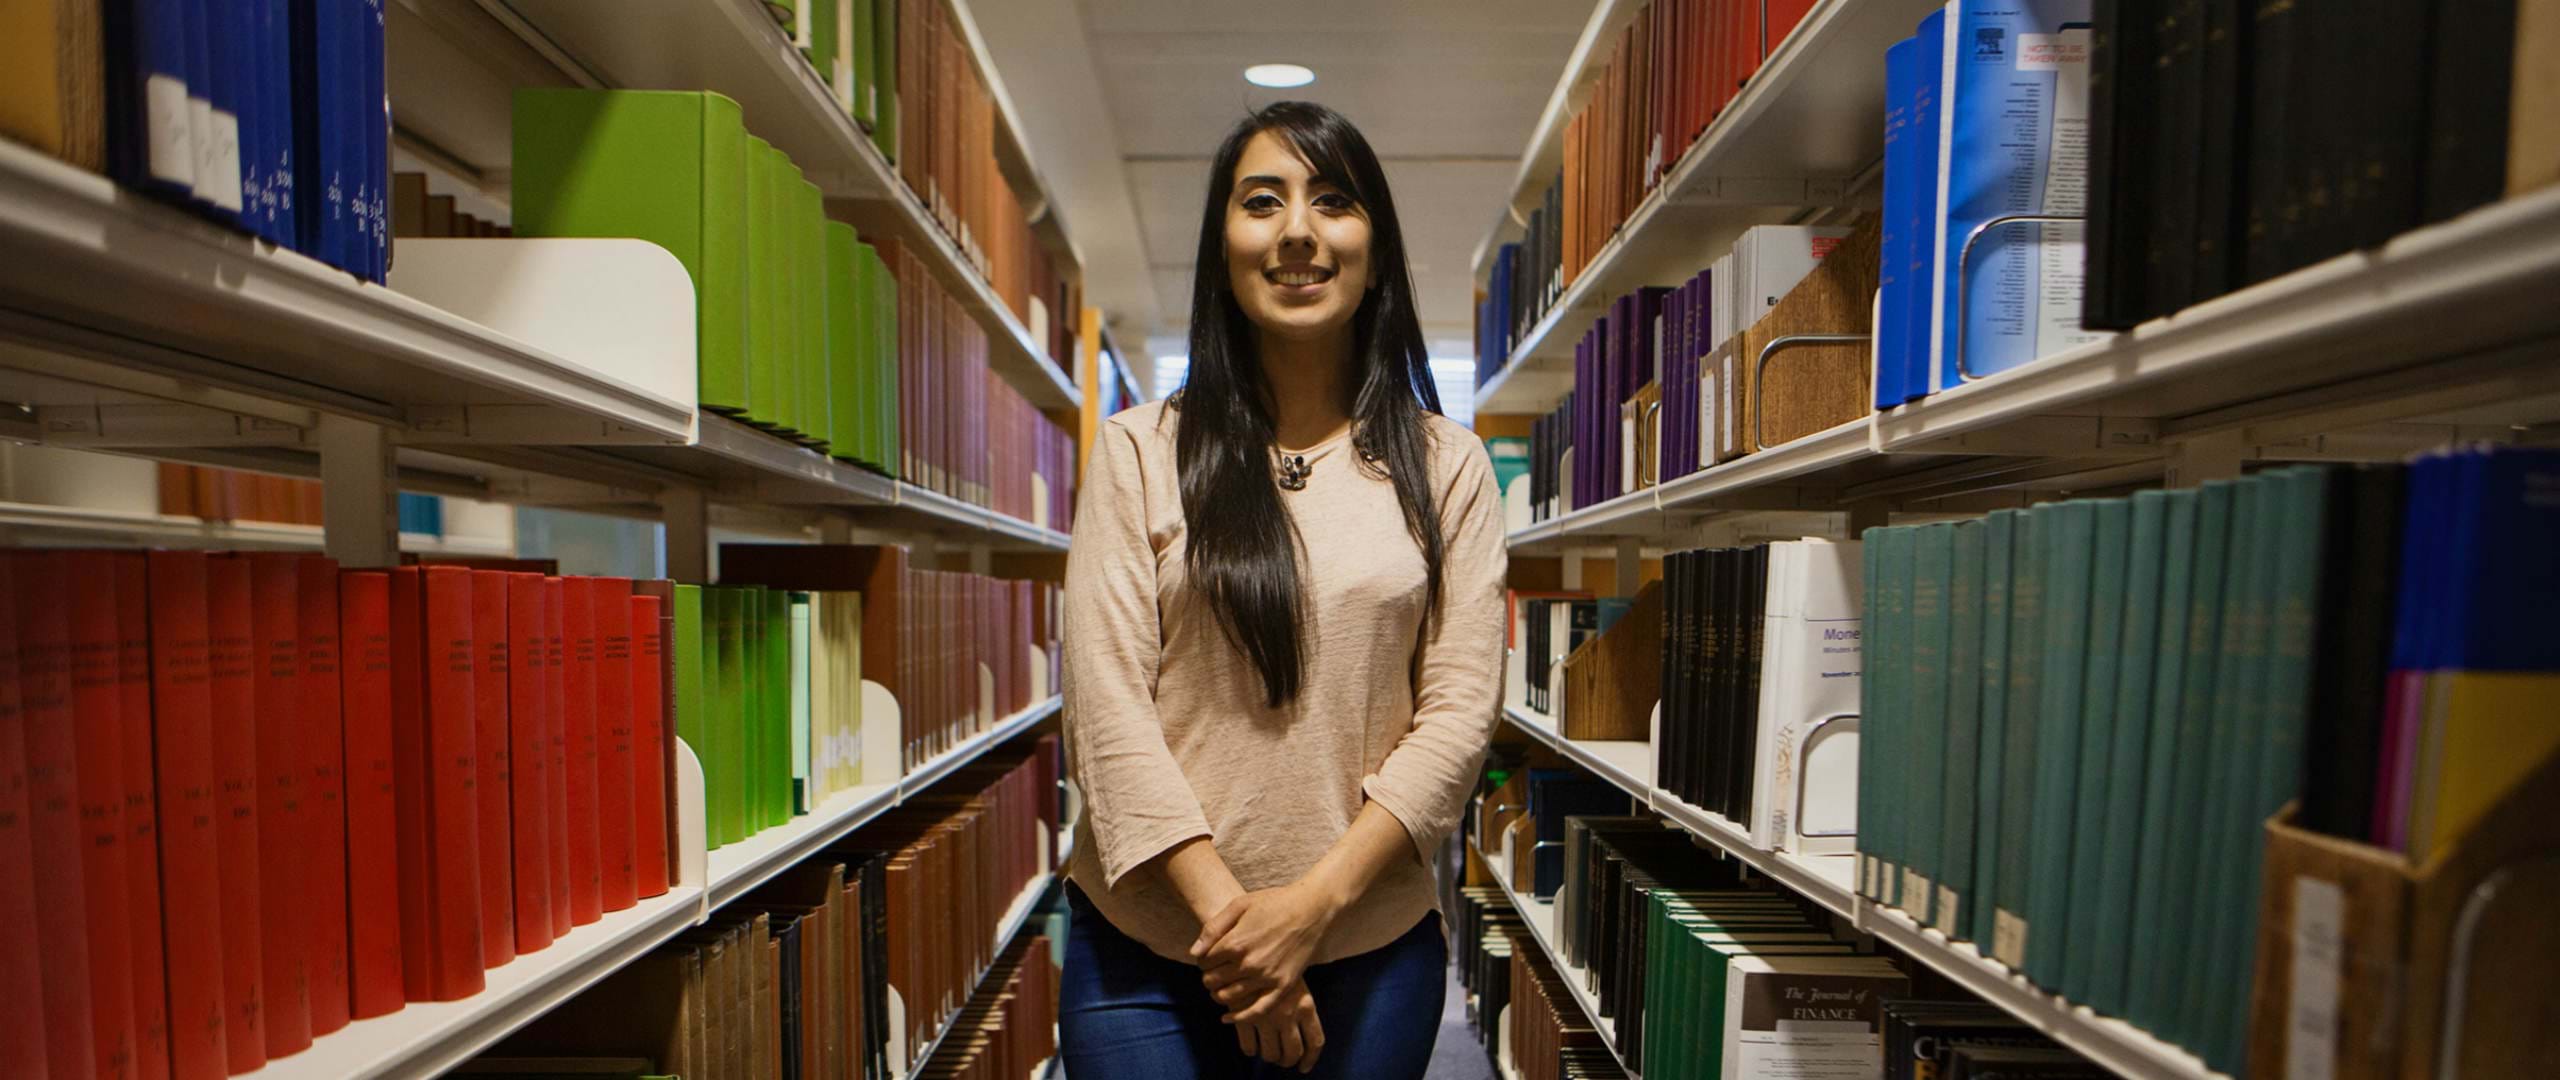 Student in the Abertay University library